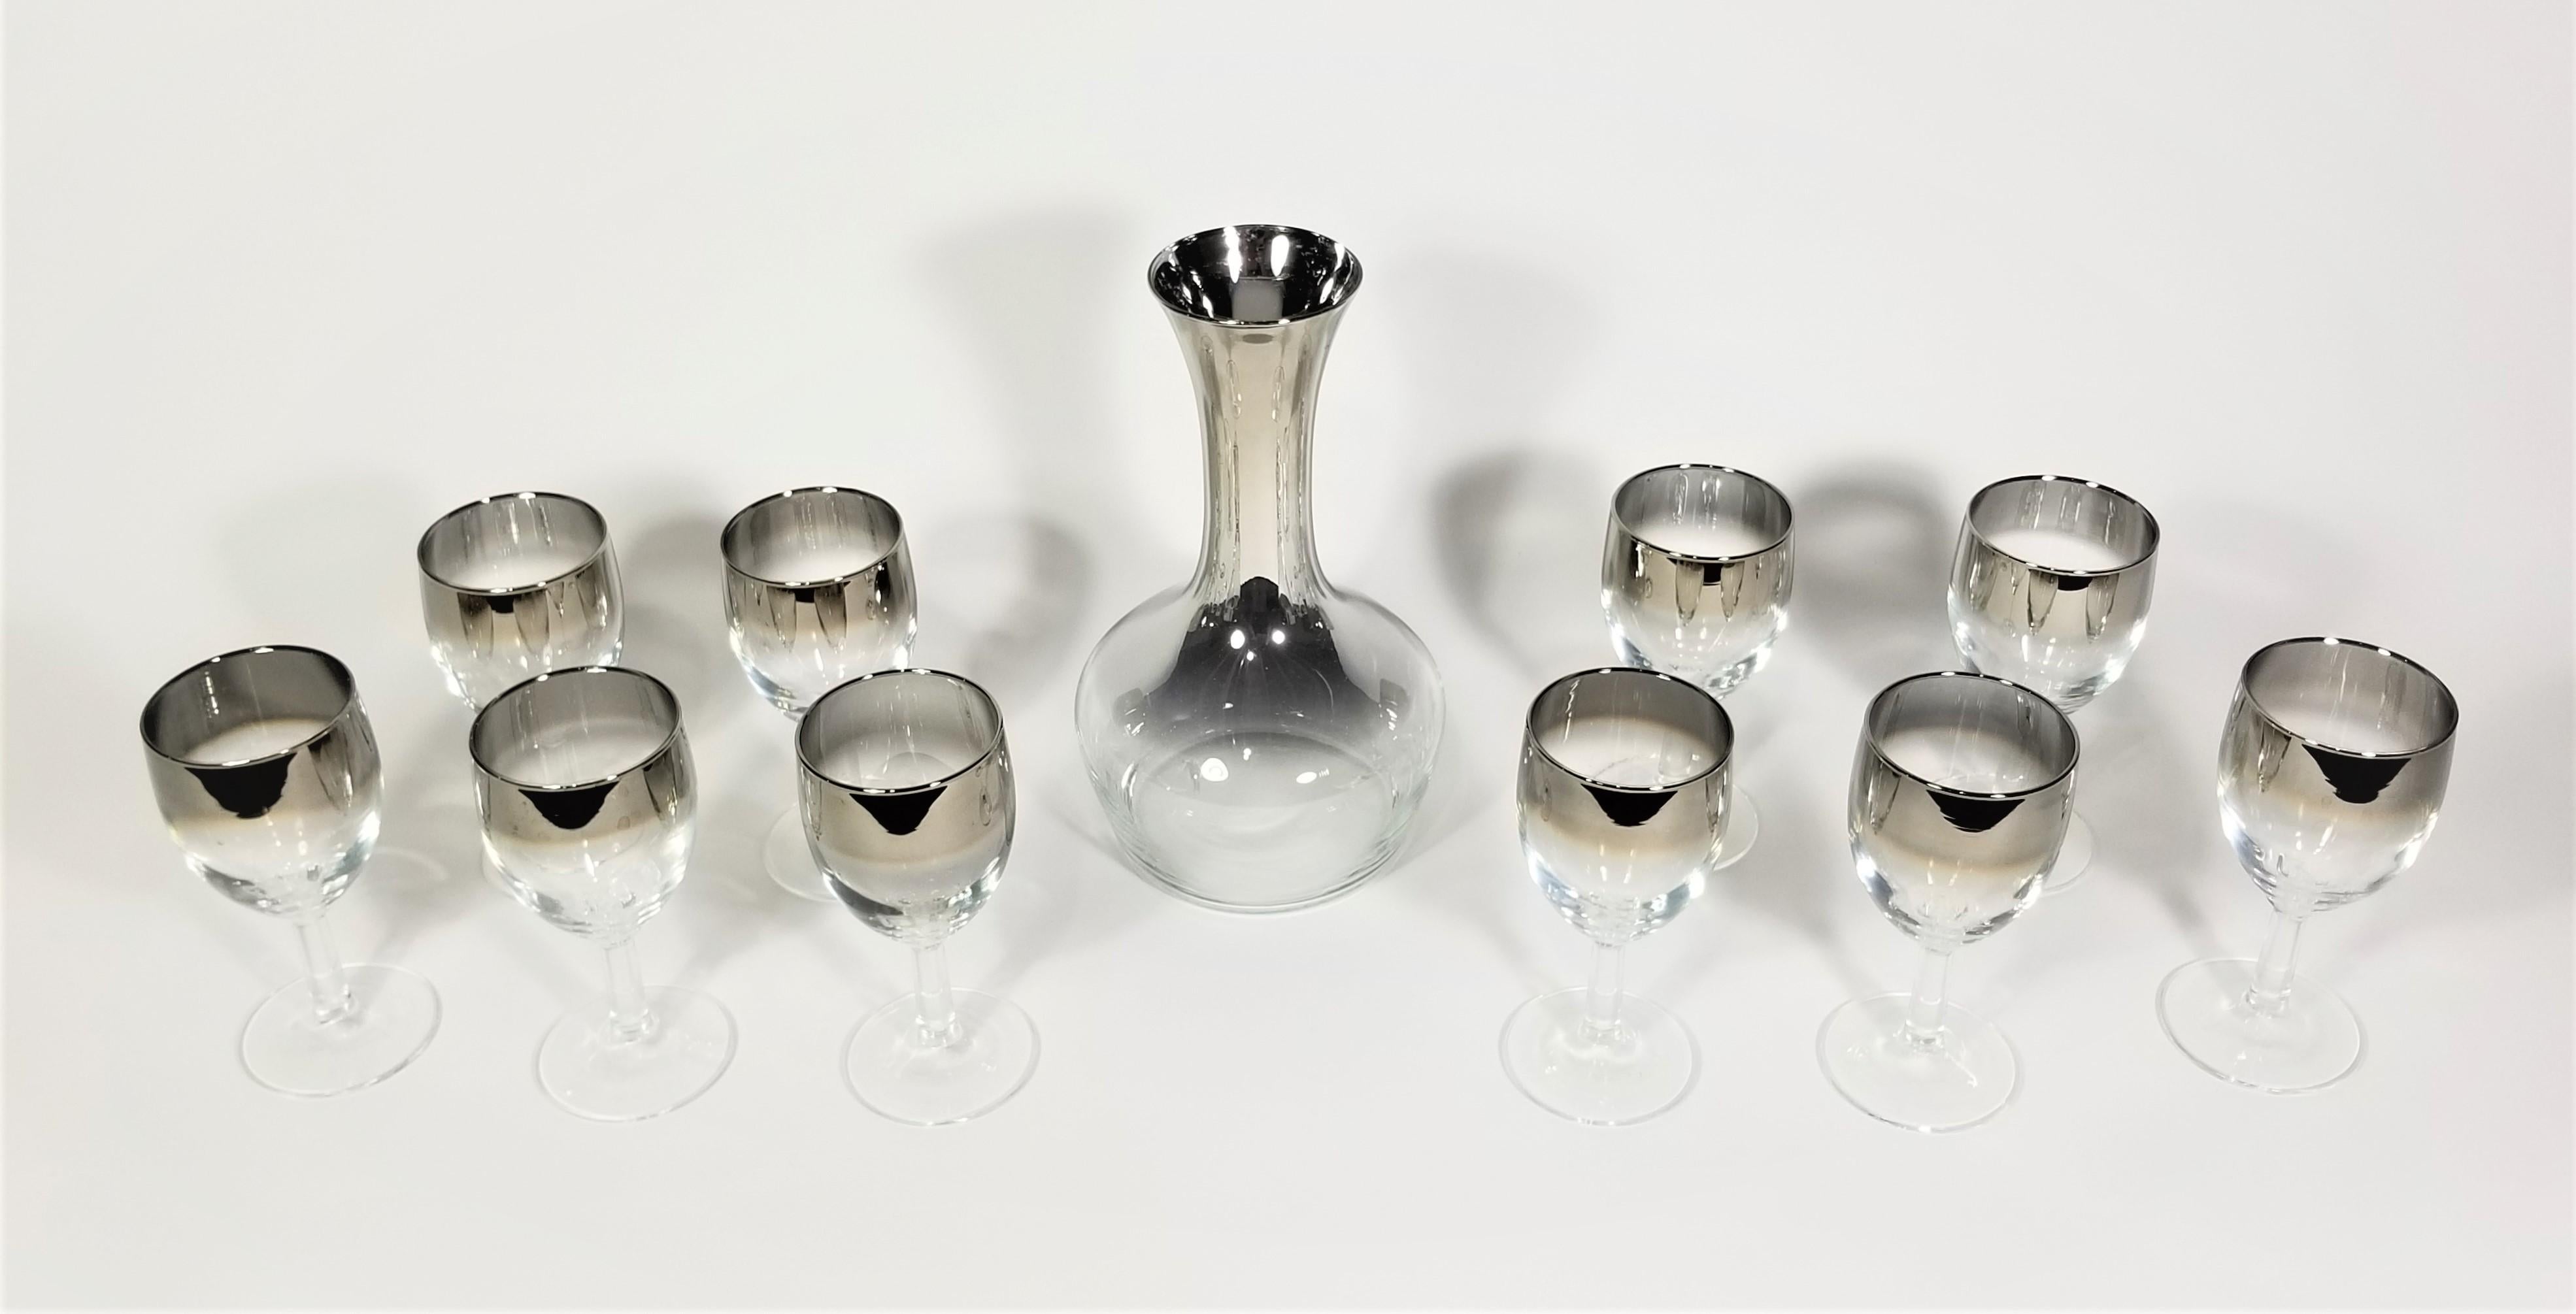 French mid-century 1960s glassware barware. Silver fade Design in style of Dorothy Thorpe. Set of 8 wine or cordial glasses with matching carafe. All glasses marked France. 

Measurements:
Decanter height: 8.5 inches
Decanter diameter: 5.0